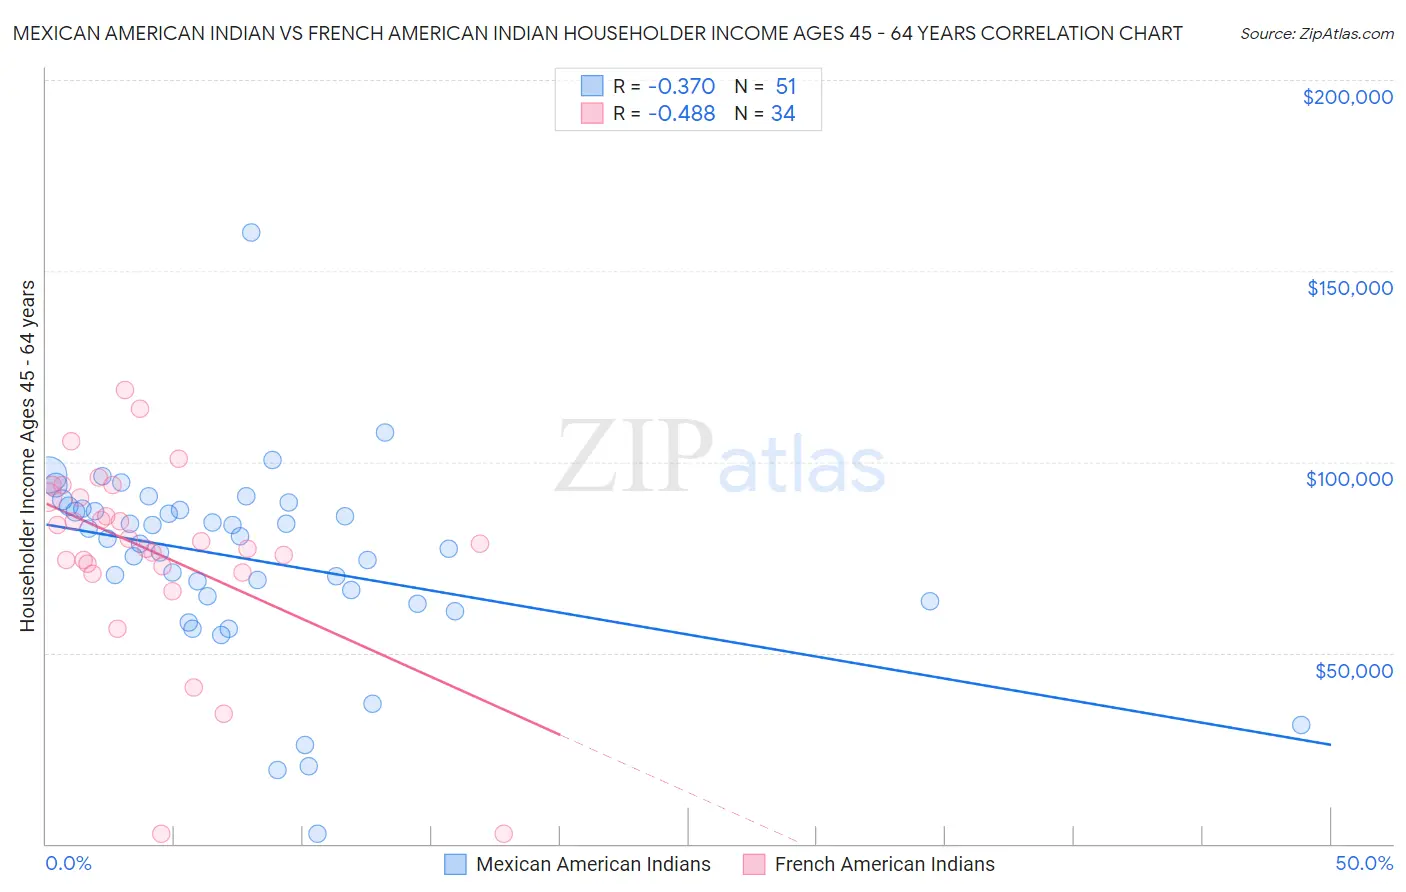 Mexican American Indian vs French American Indian Householder Income Ages 45 - 64 years